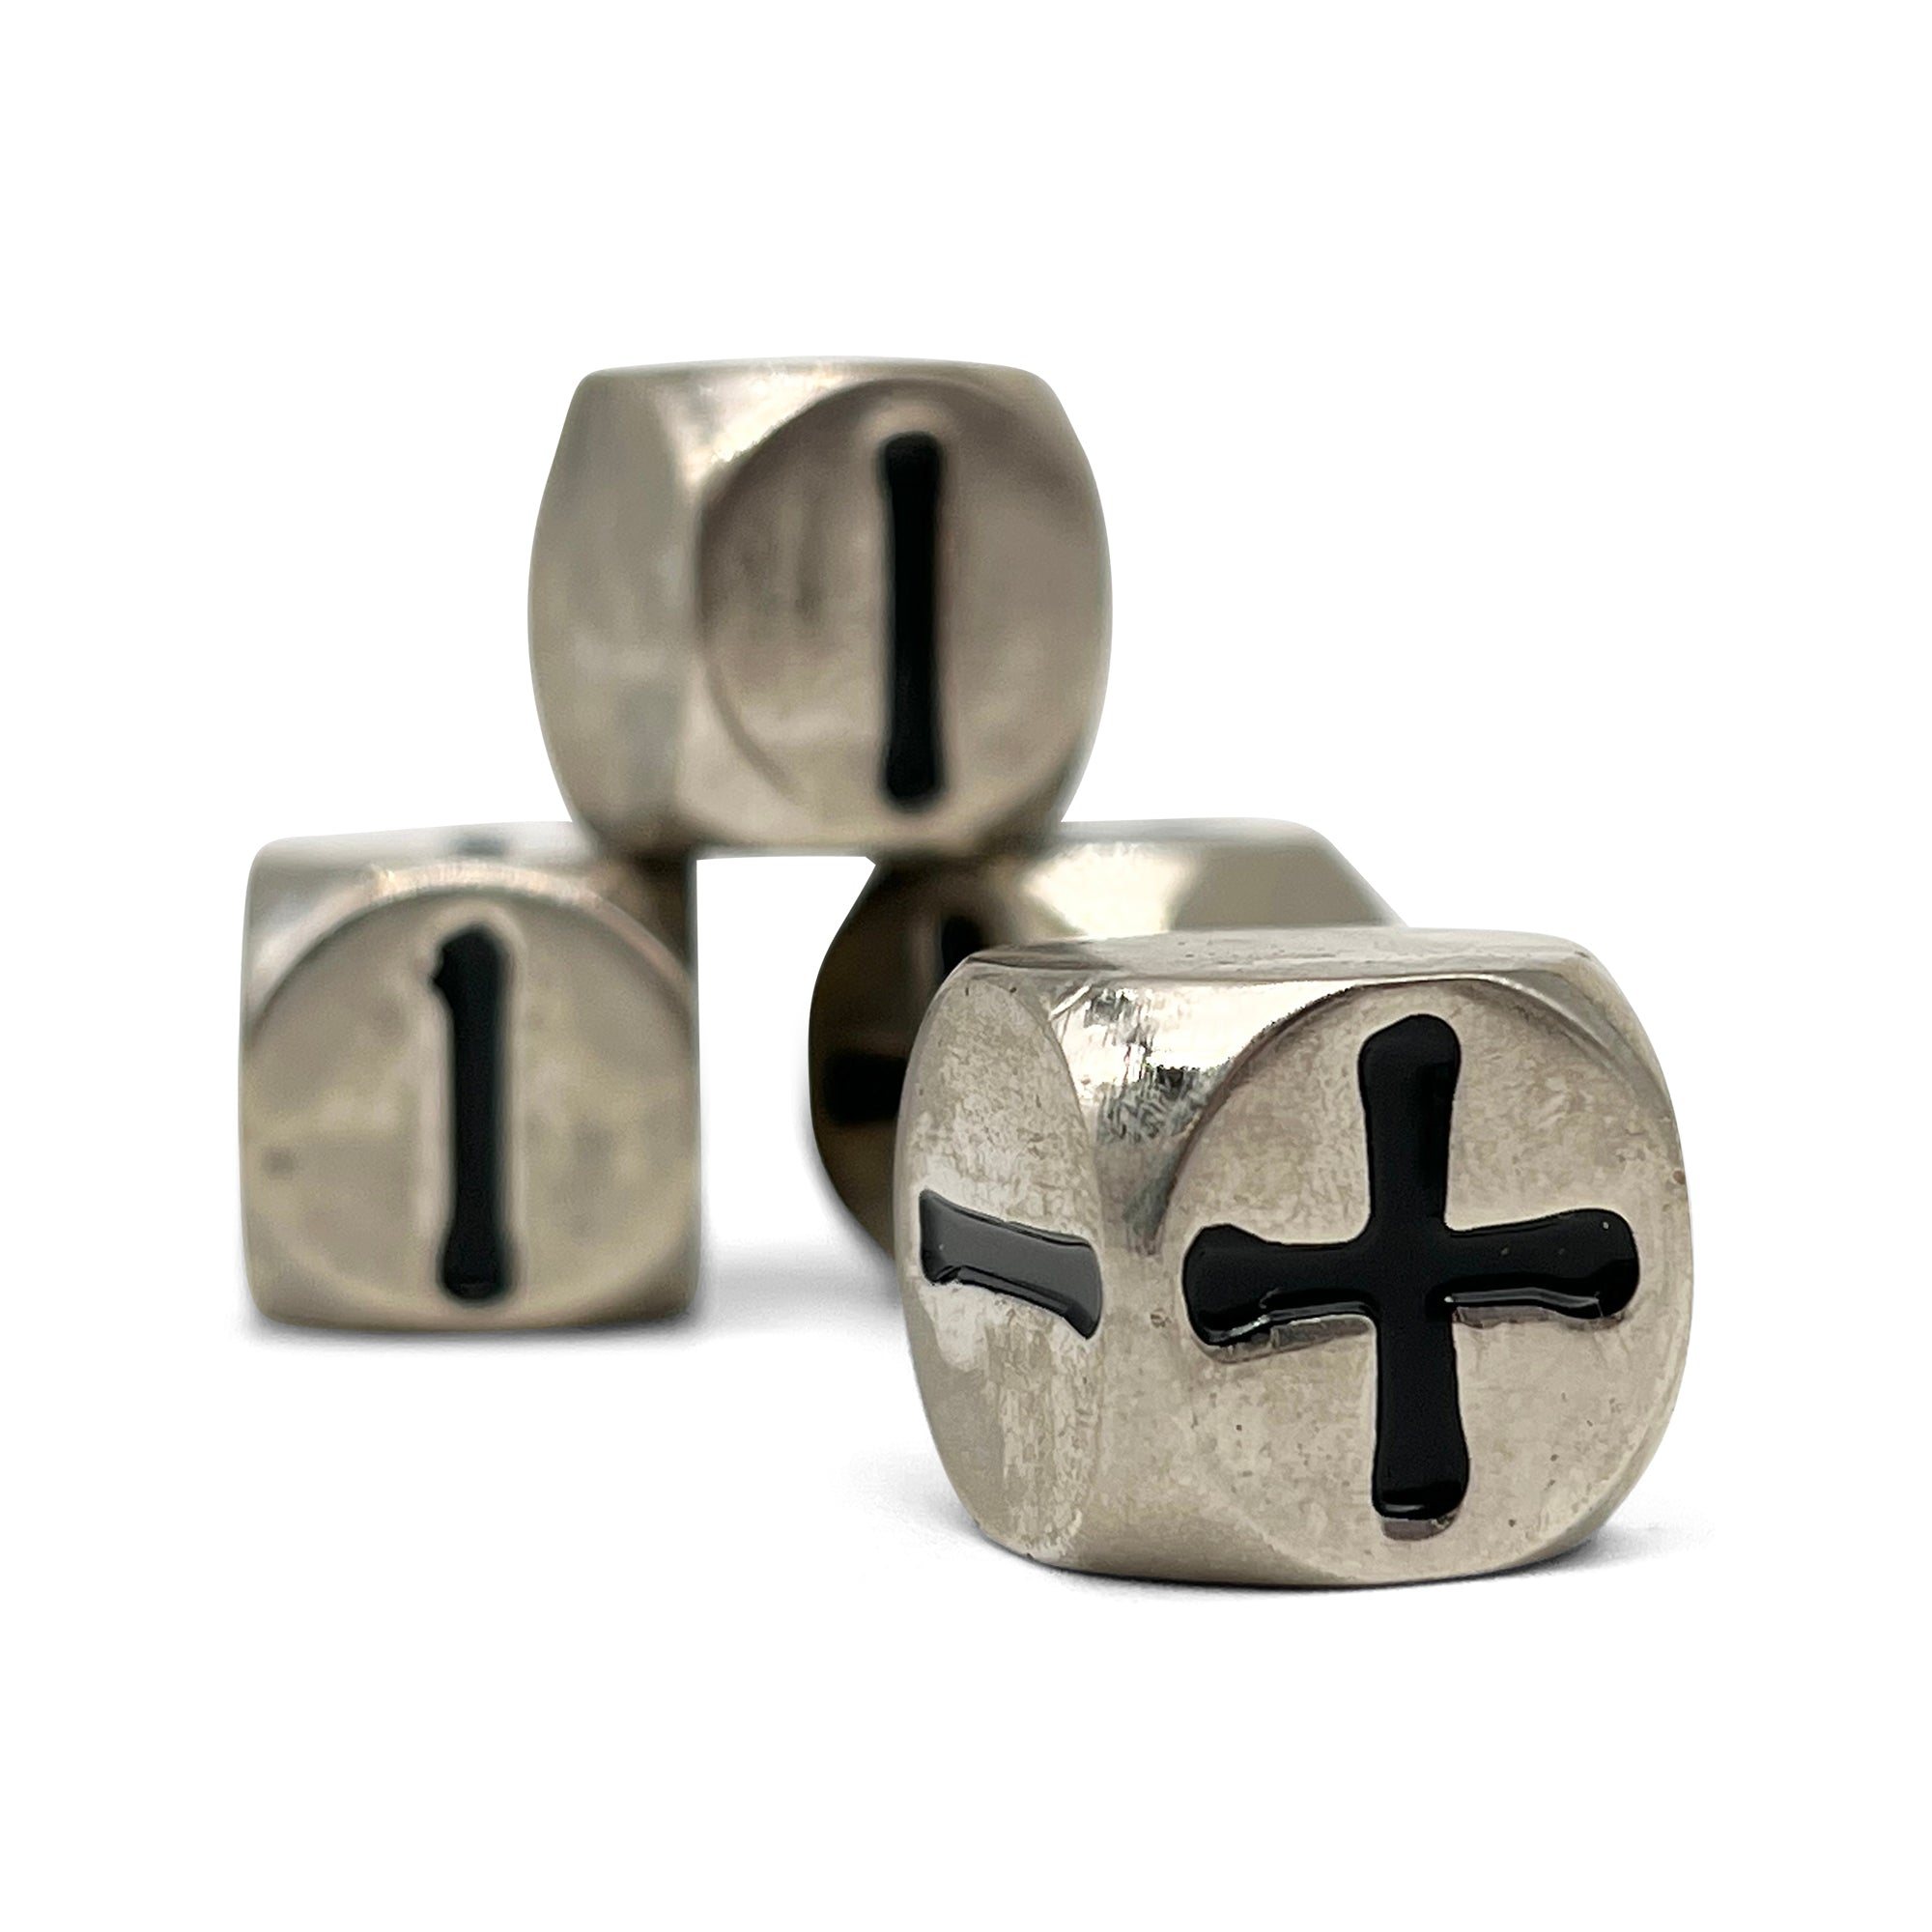 Fate Dice – Chainmail Silver Pack of 4 Metal Dice - NOR 00709